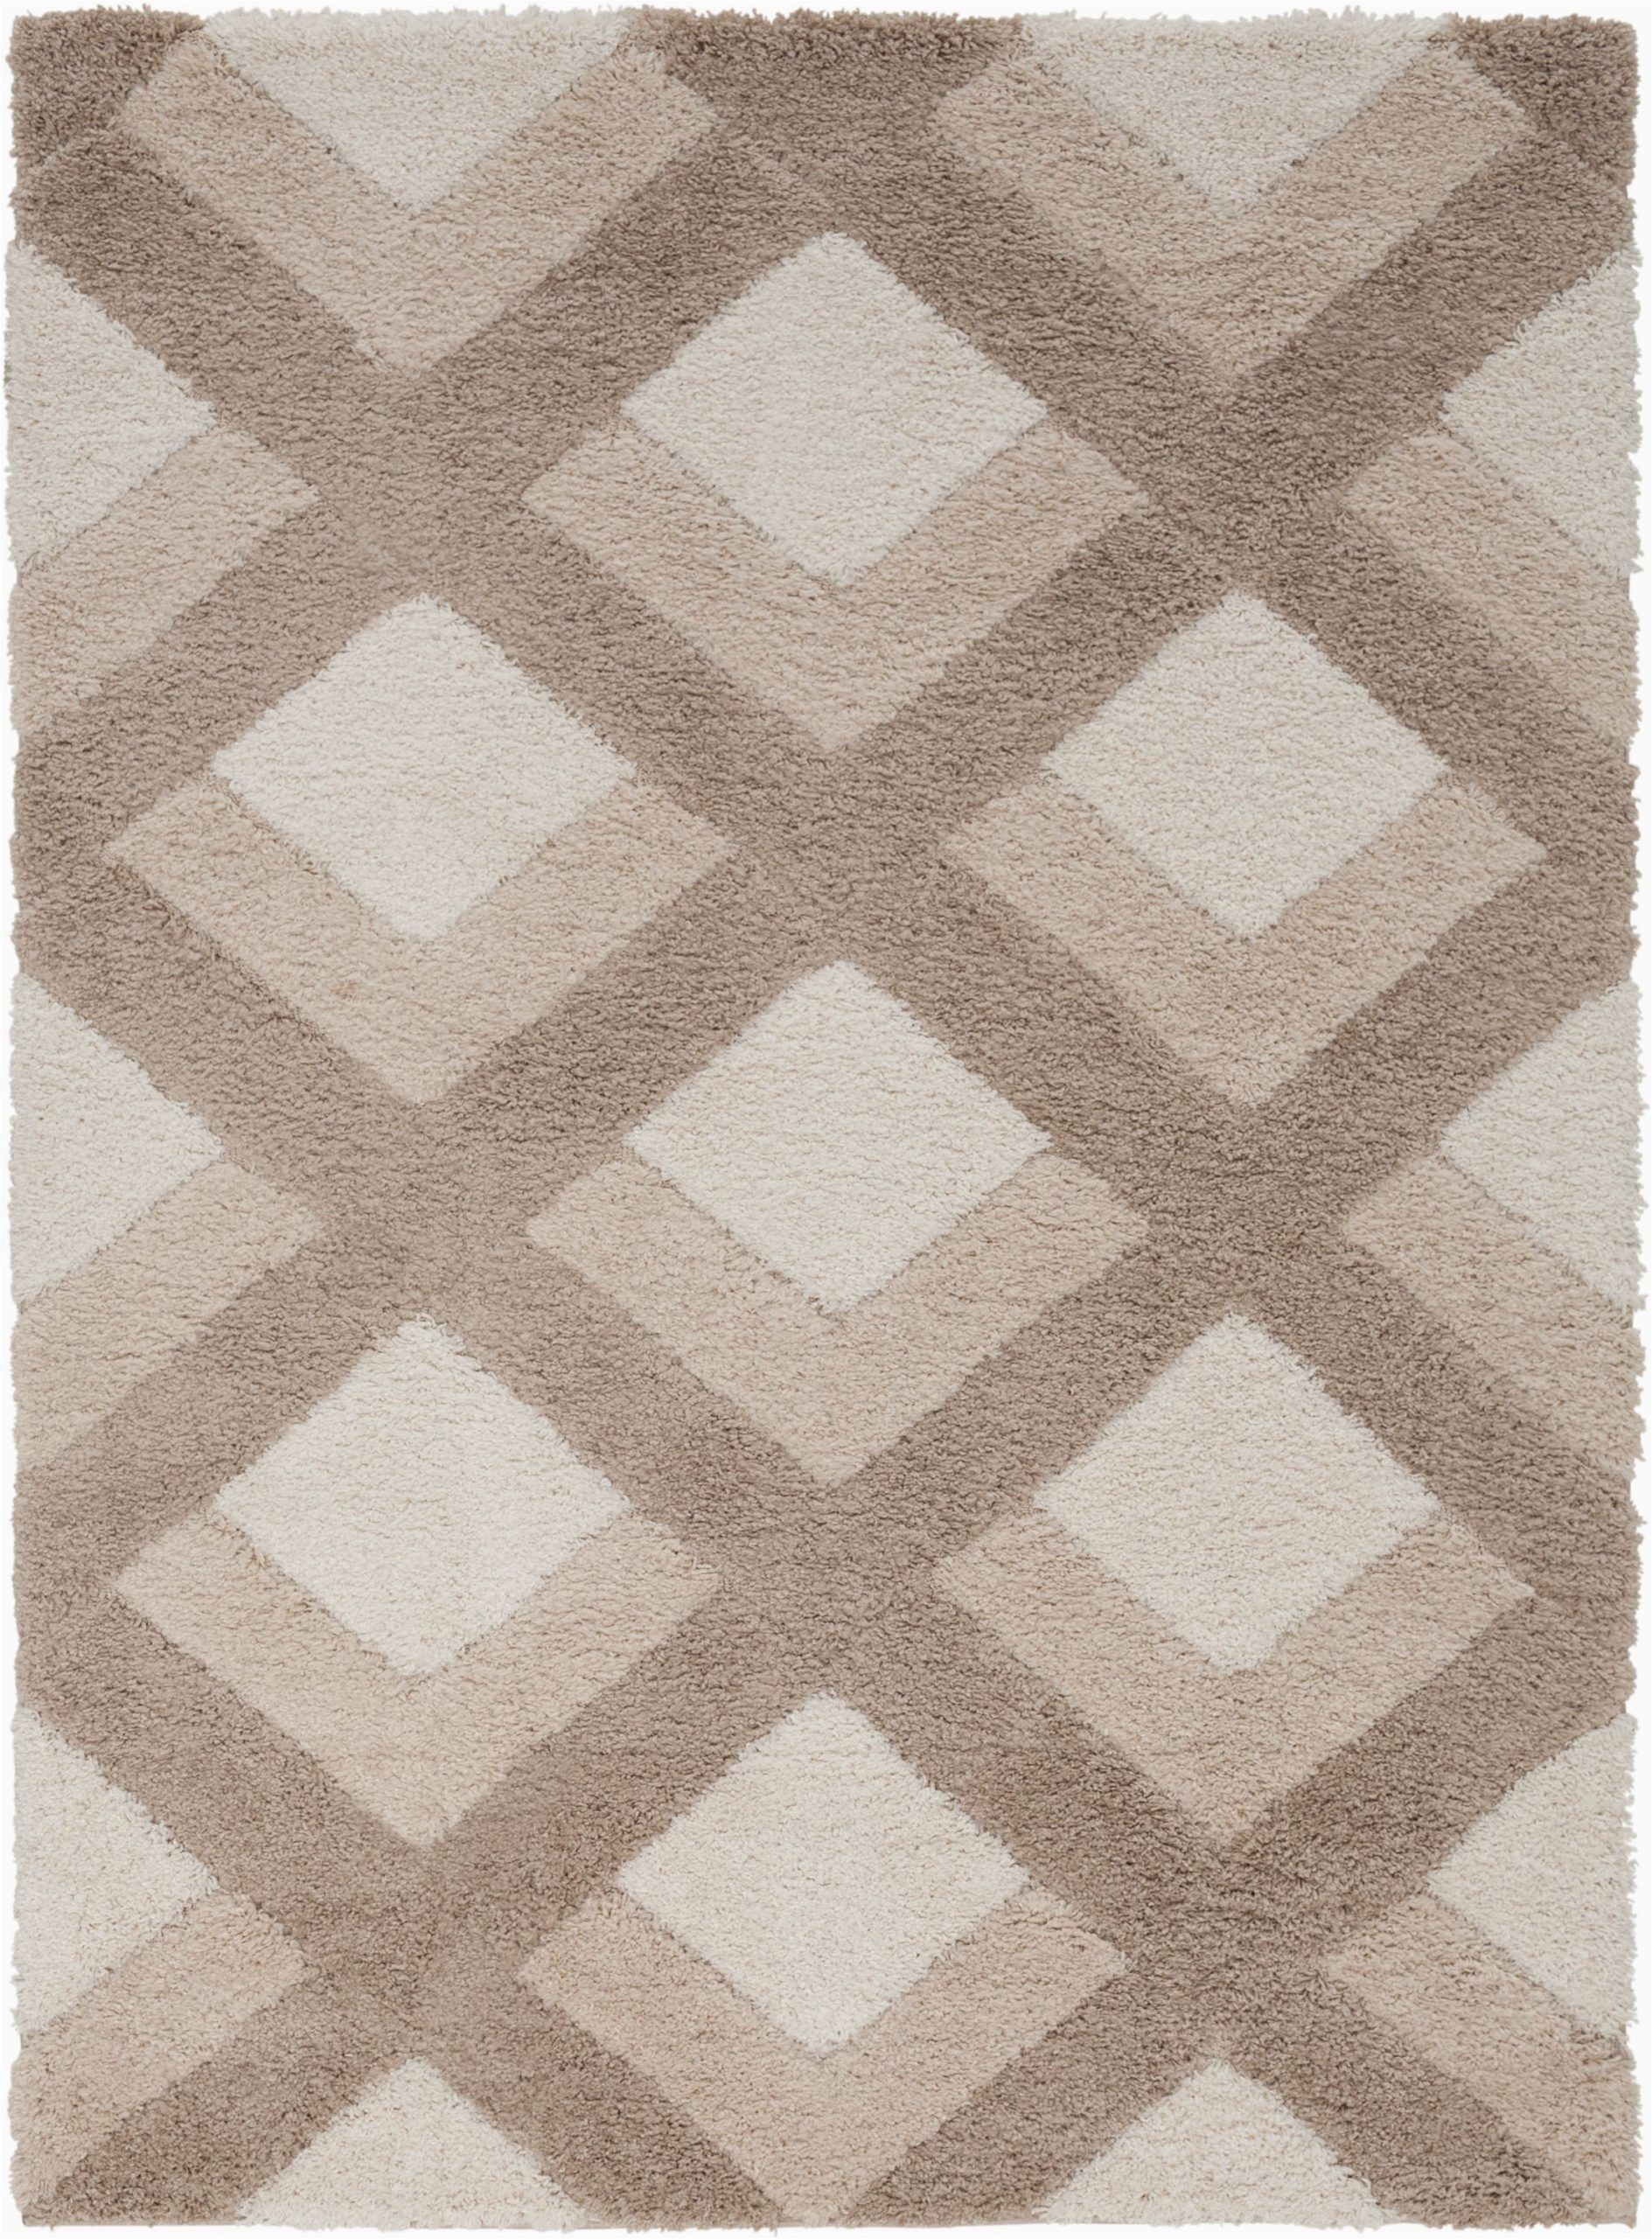 Better Homes and Gardens 8×10 area Rugs Better Homes & Gardens 5 X 7 High Low Diamond Shag area Rug Walmart